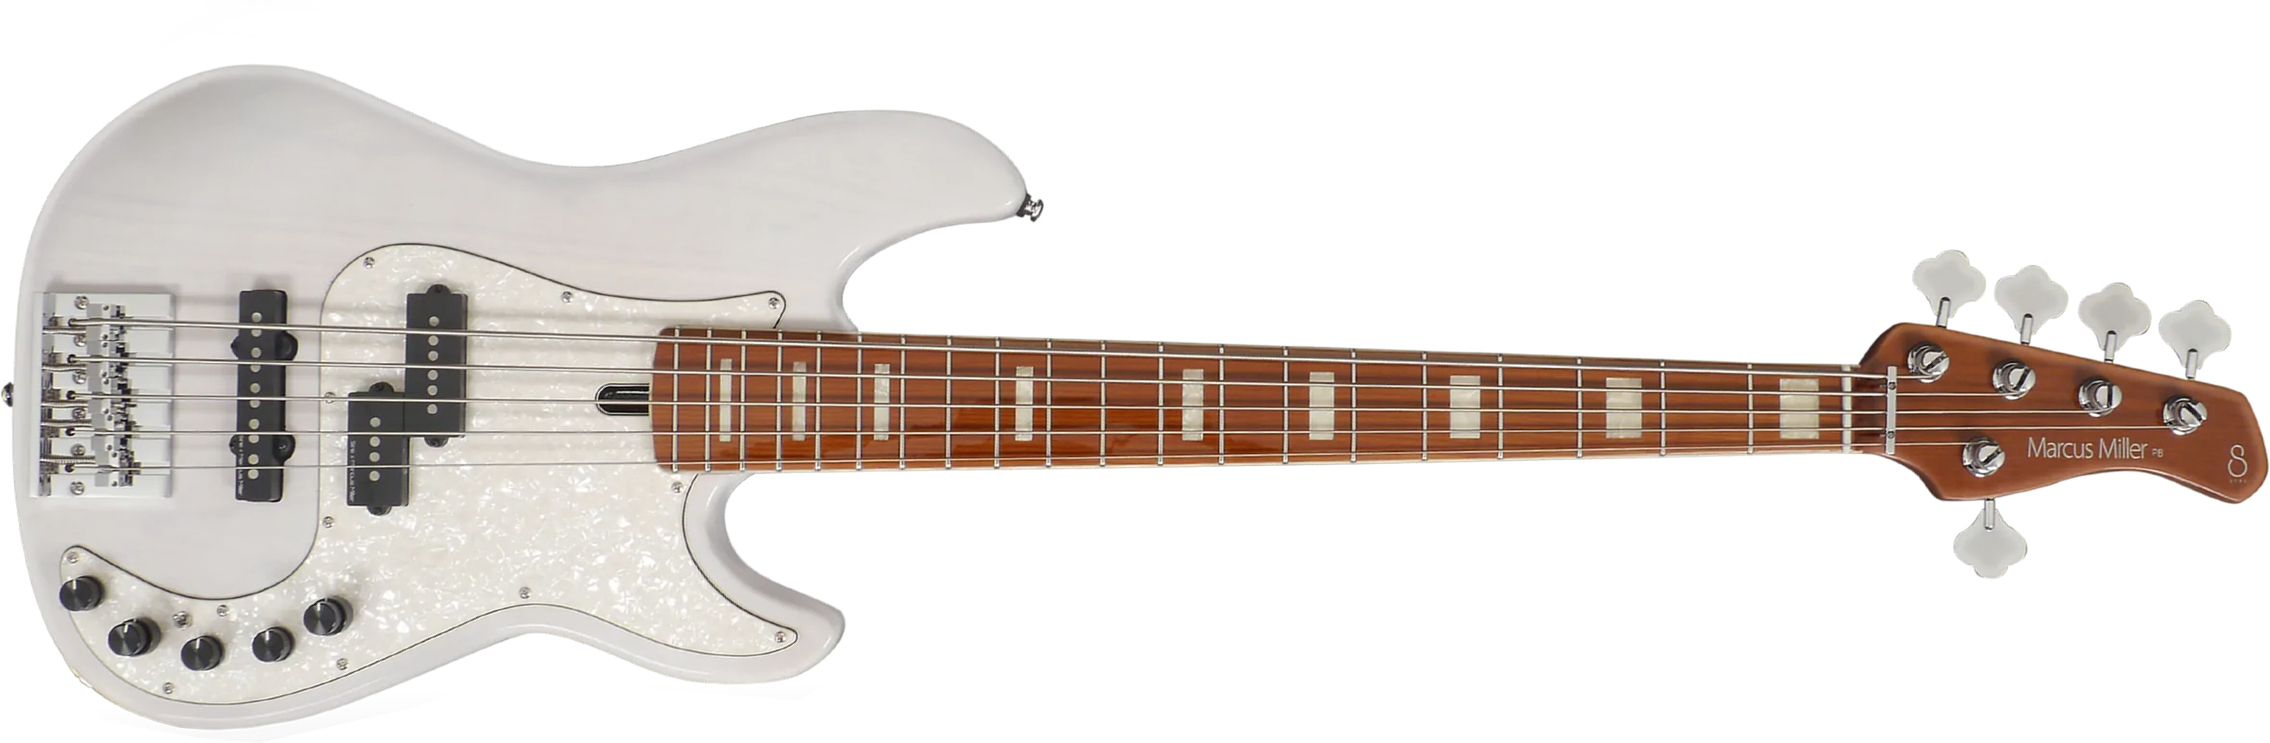 Marcus Miller P8 5st 5c Active Mn - White Blonde - Solidbody E-bass - Main picture